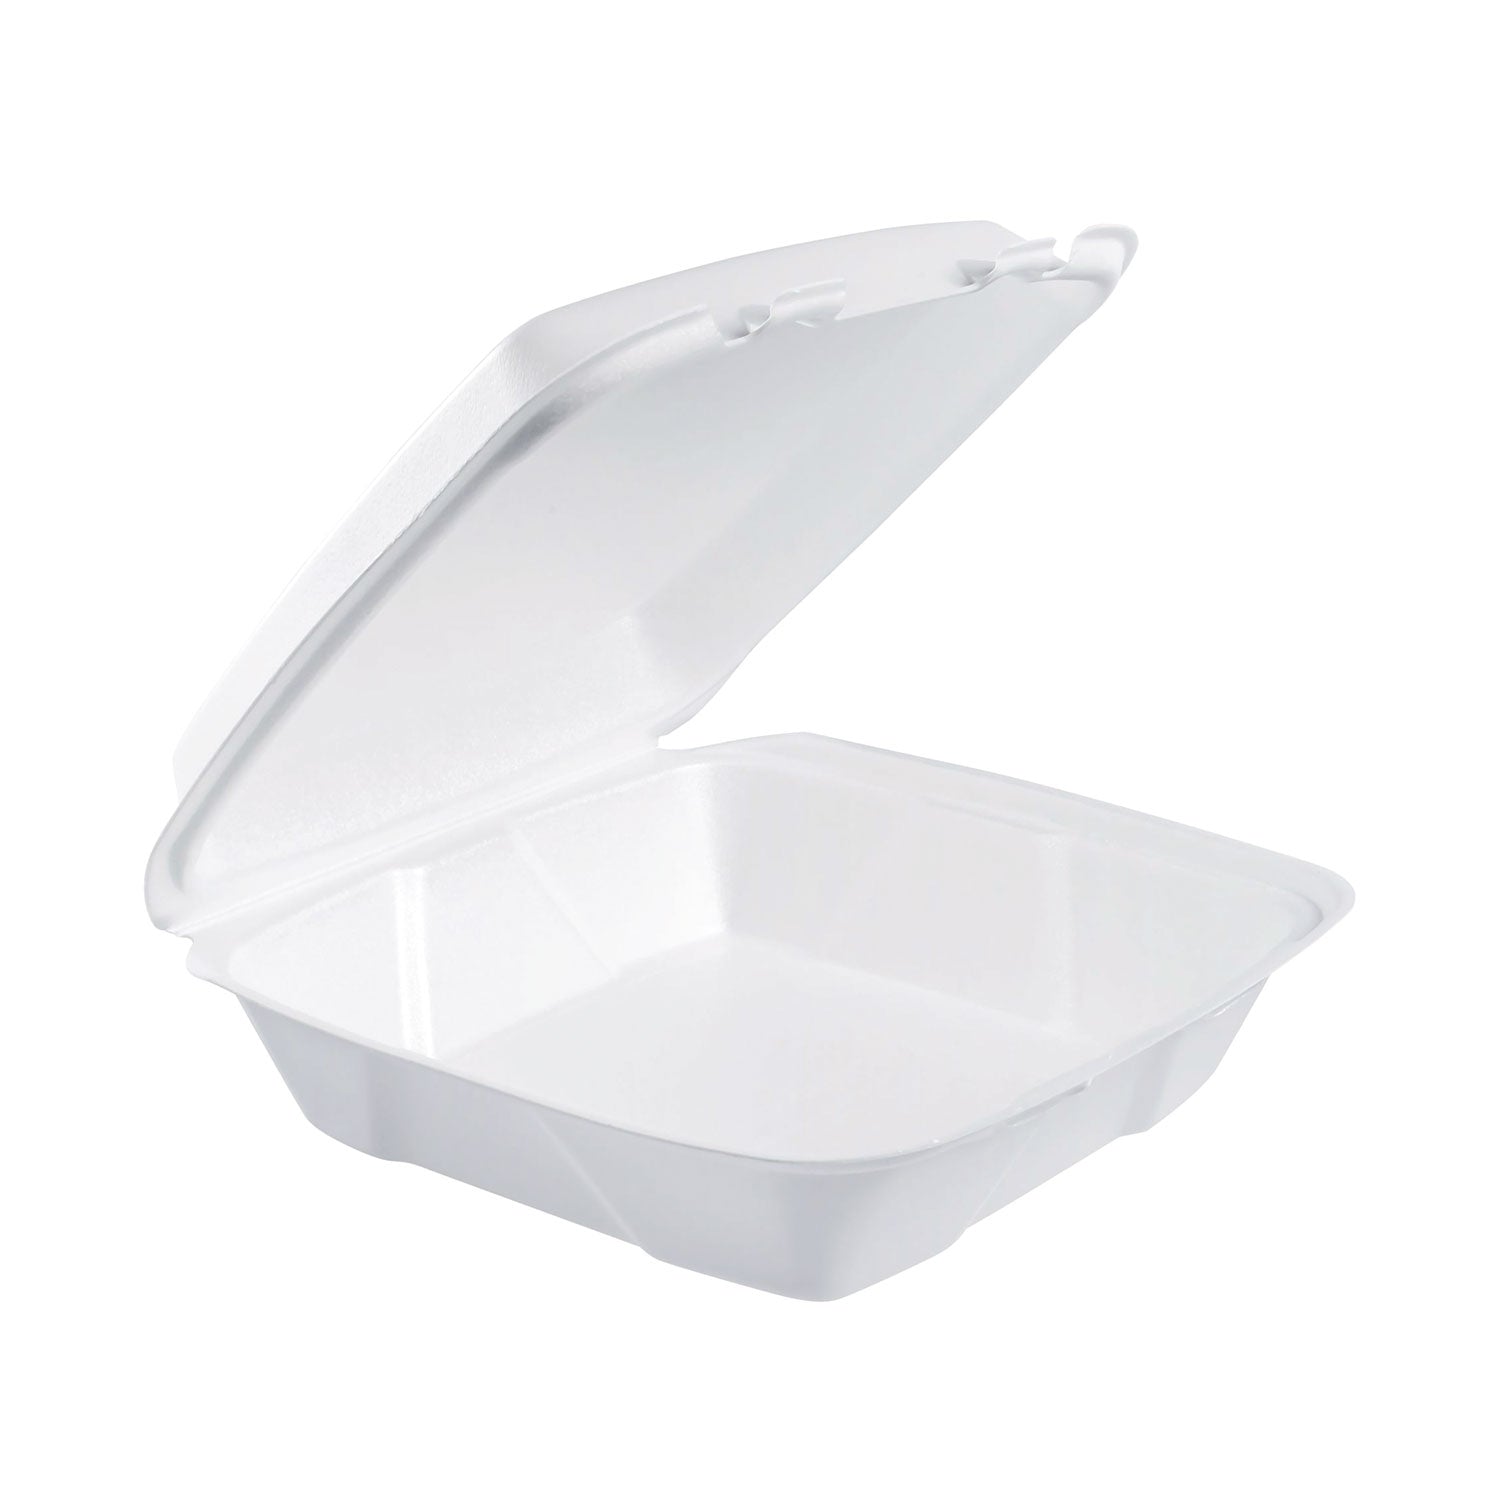 Foam Hinged Lid Containers, 9 x 9 x 3, White, 200/Carton - 